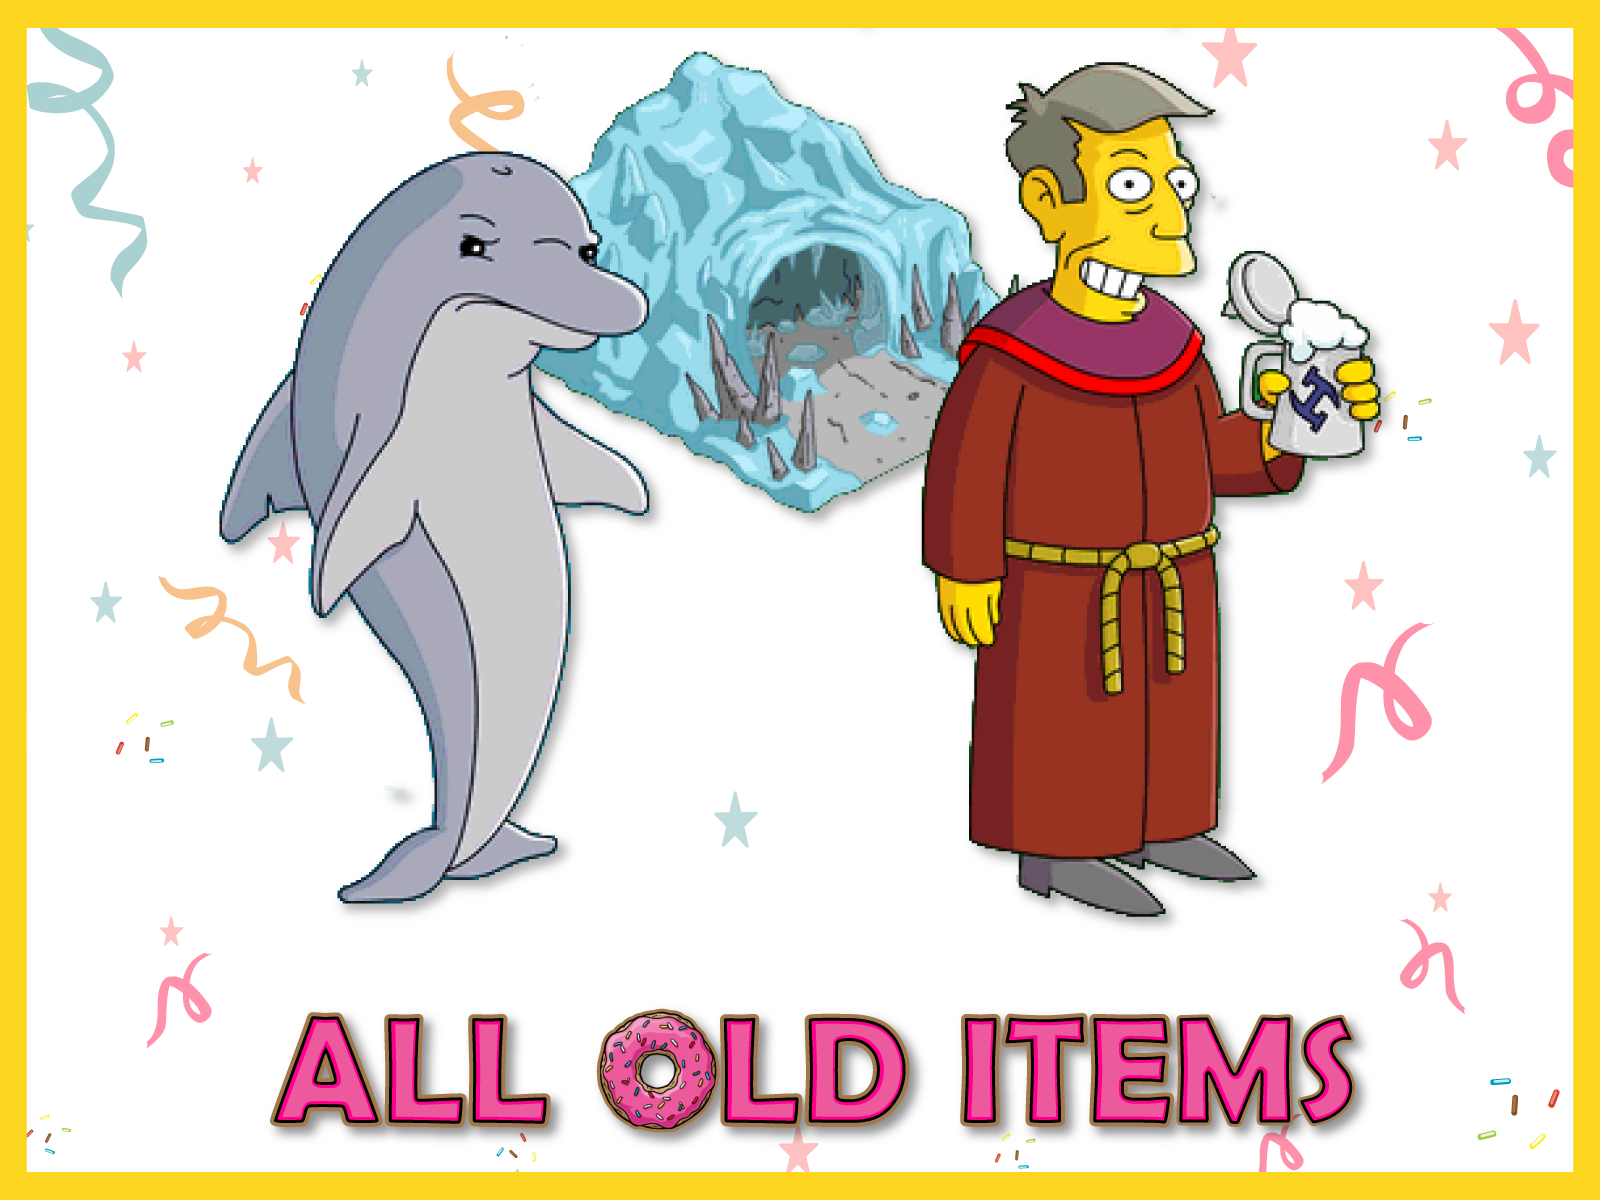 All old items